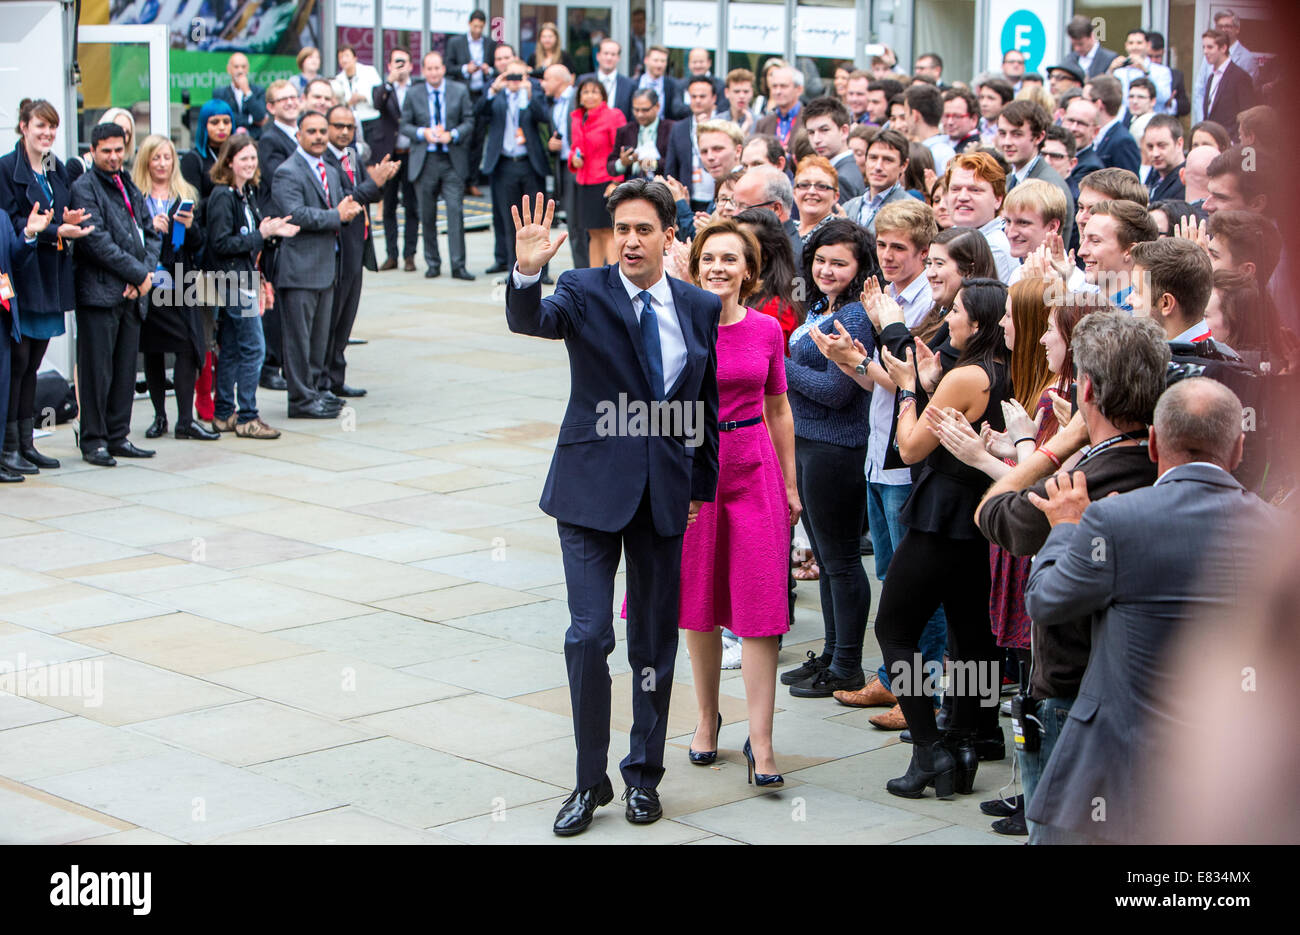 Ed Miliband and his wife Justine Thornton at the Labour party conference Stock Photo